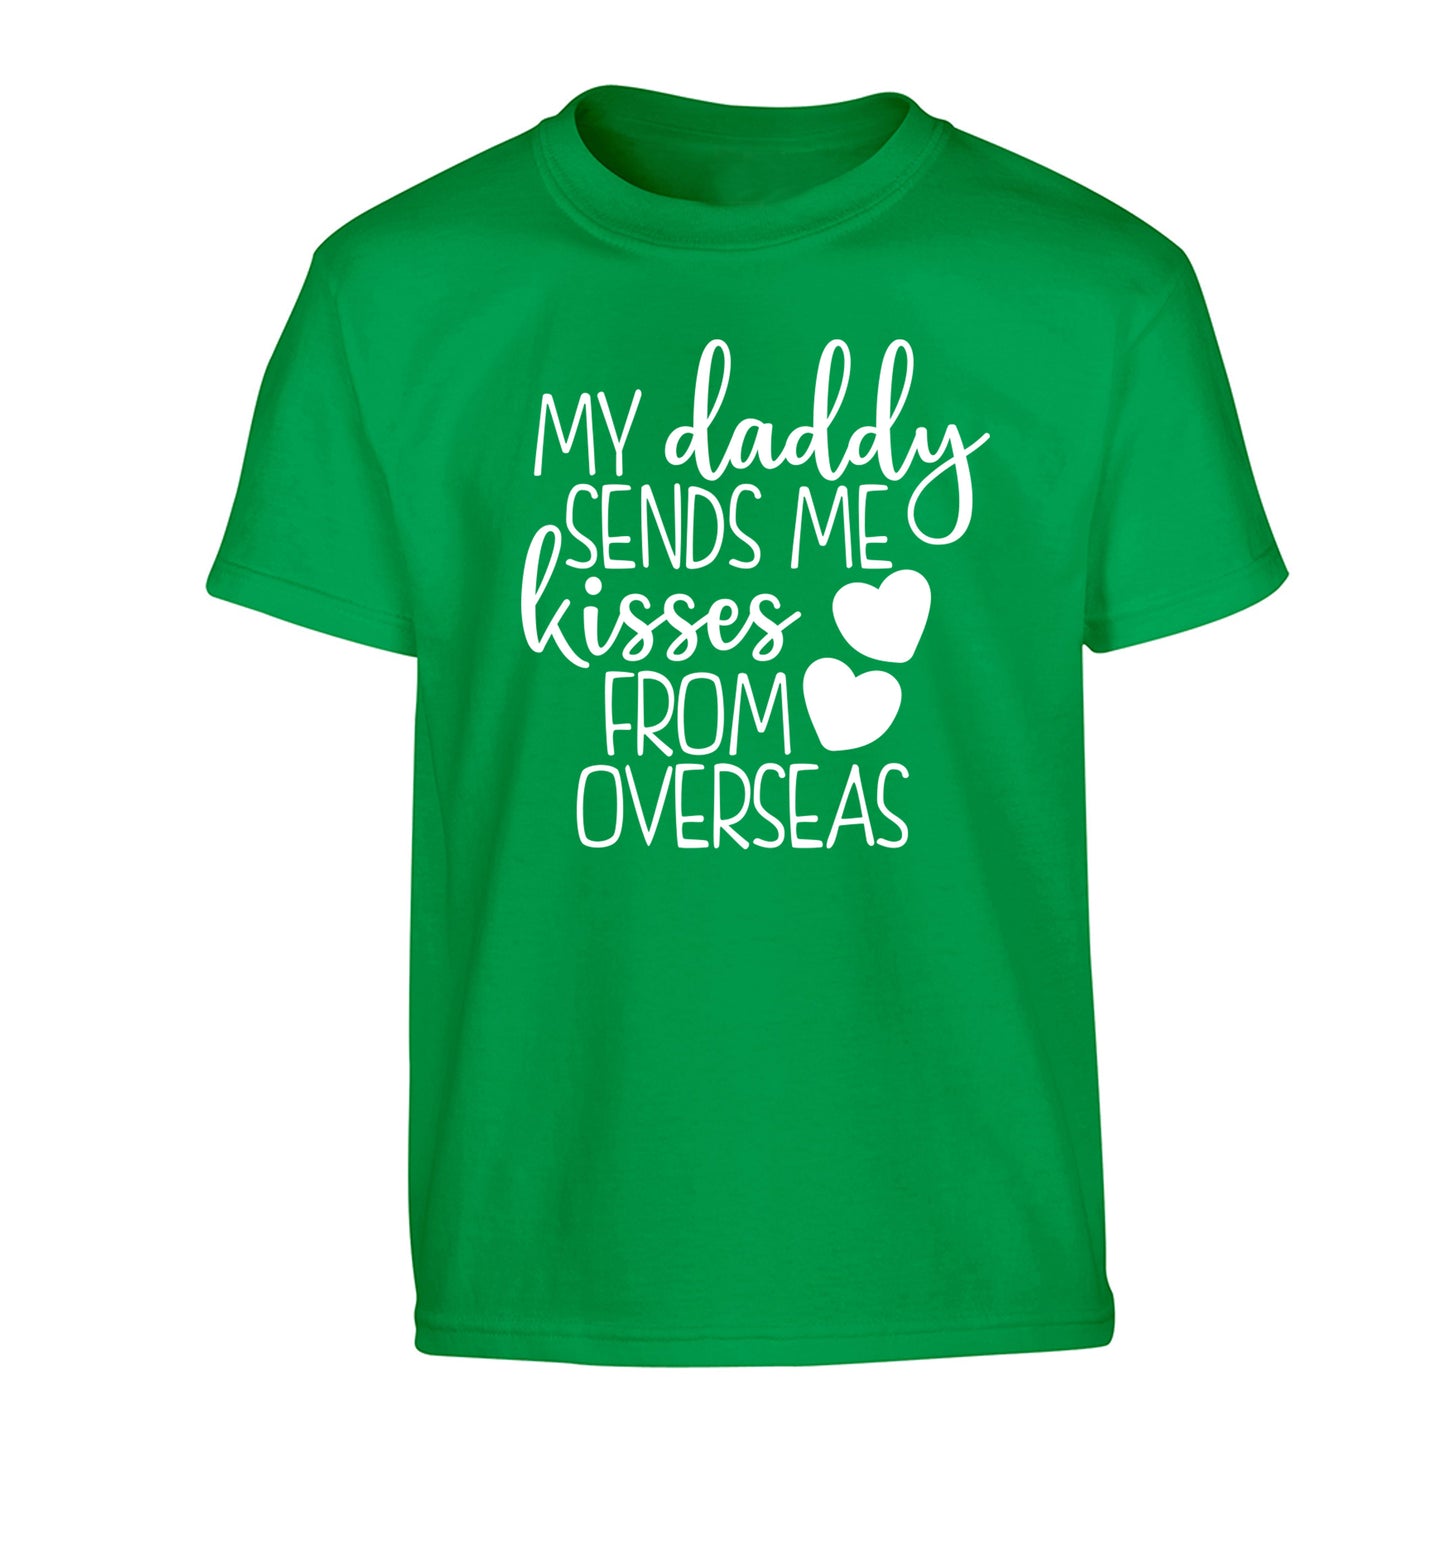 My daddy sends me kisses from overseas Children's green Tshirt 12-13 Years